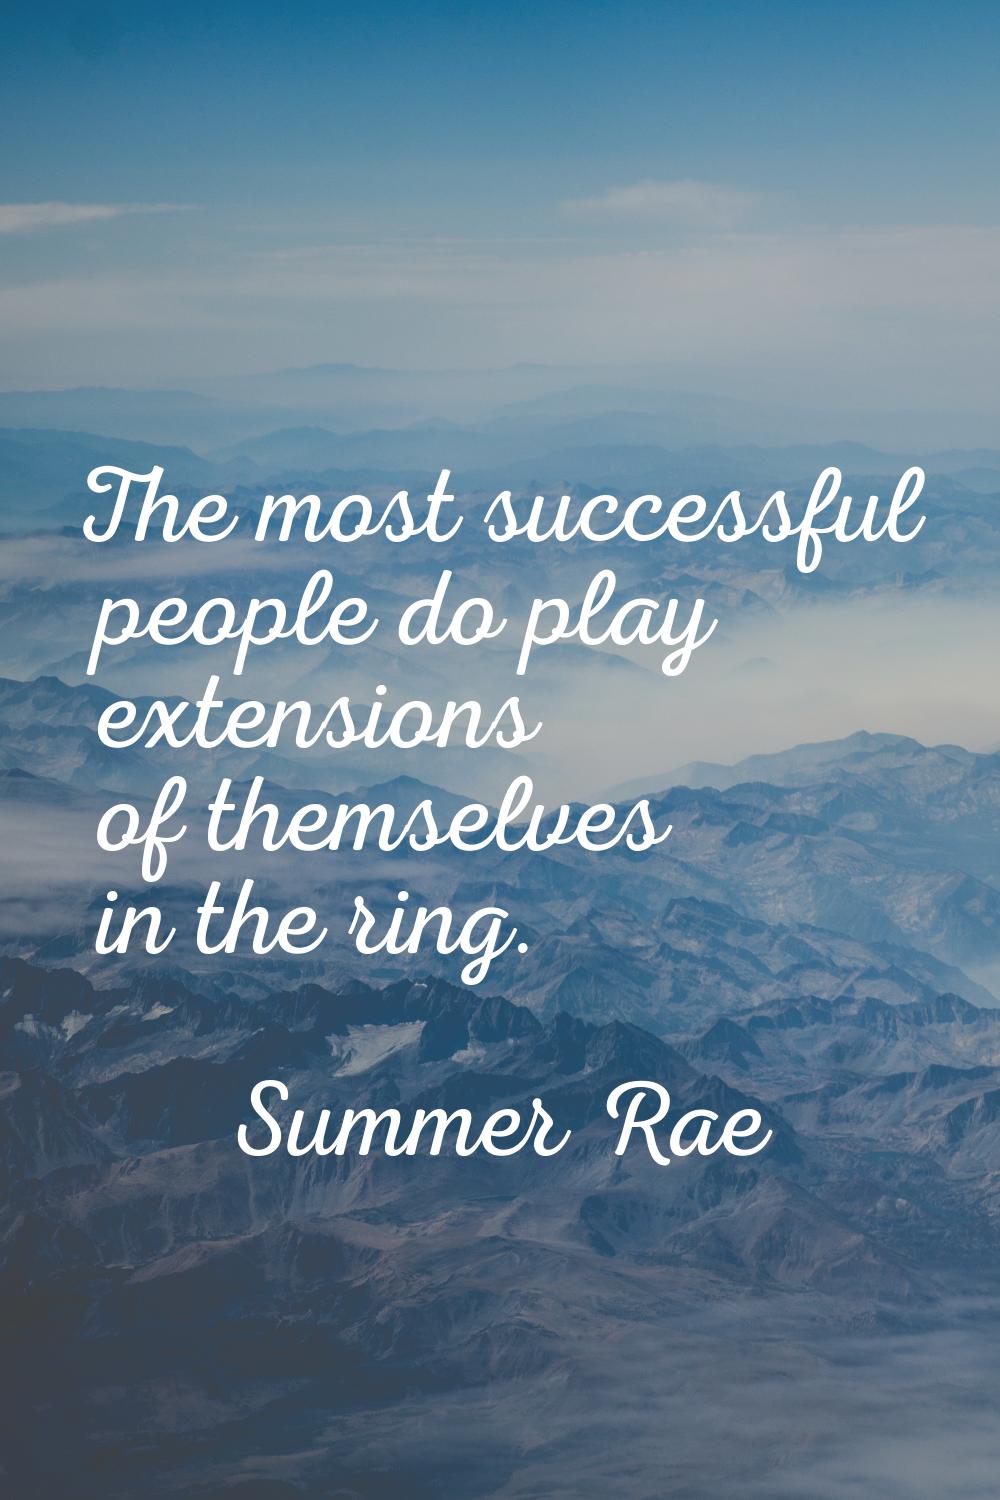 The most successful people do play extensions of themselves in the ring.